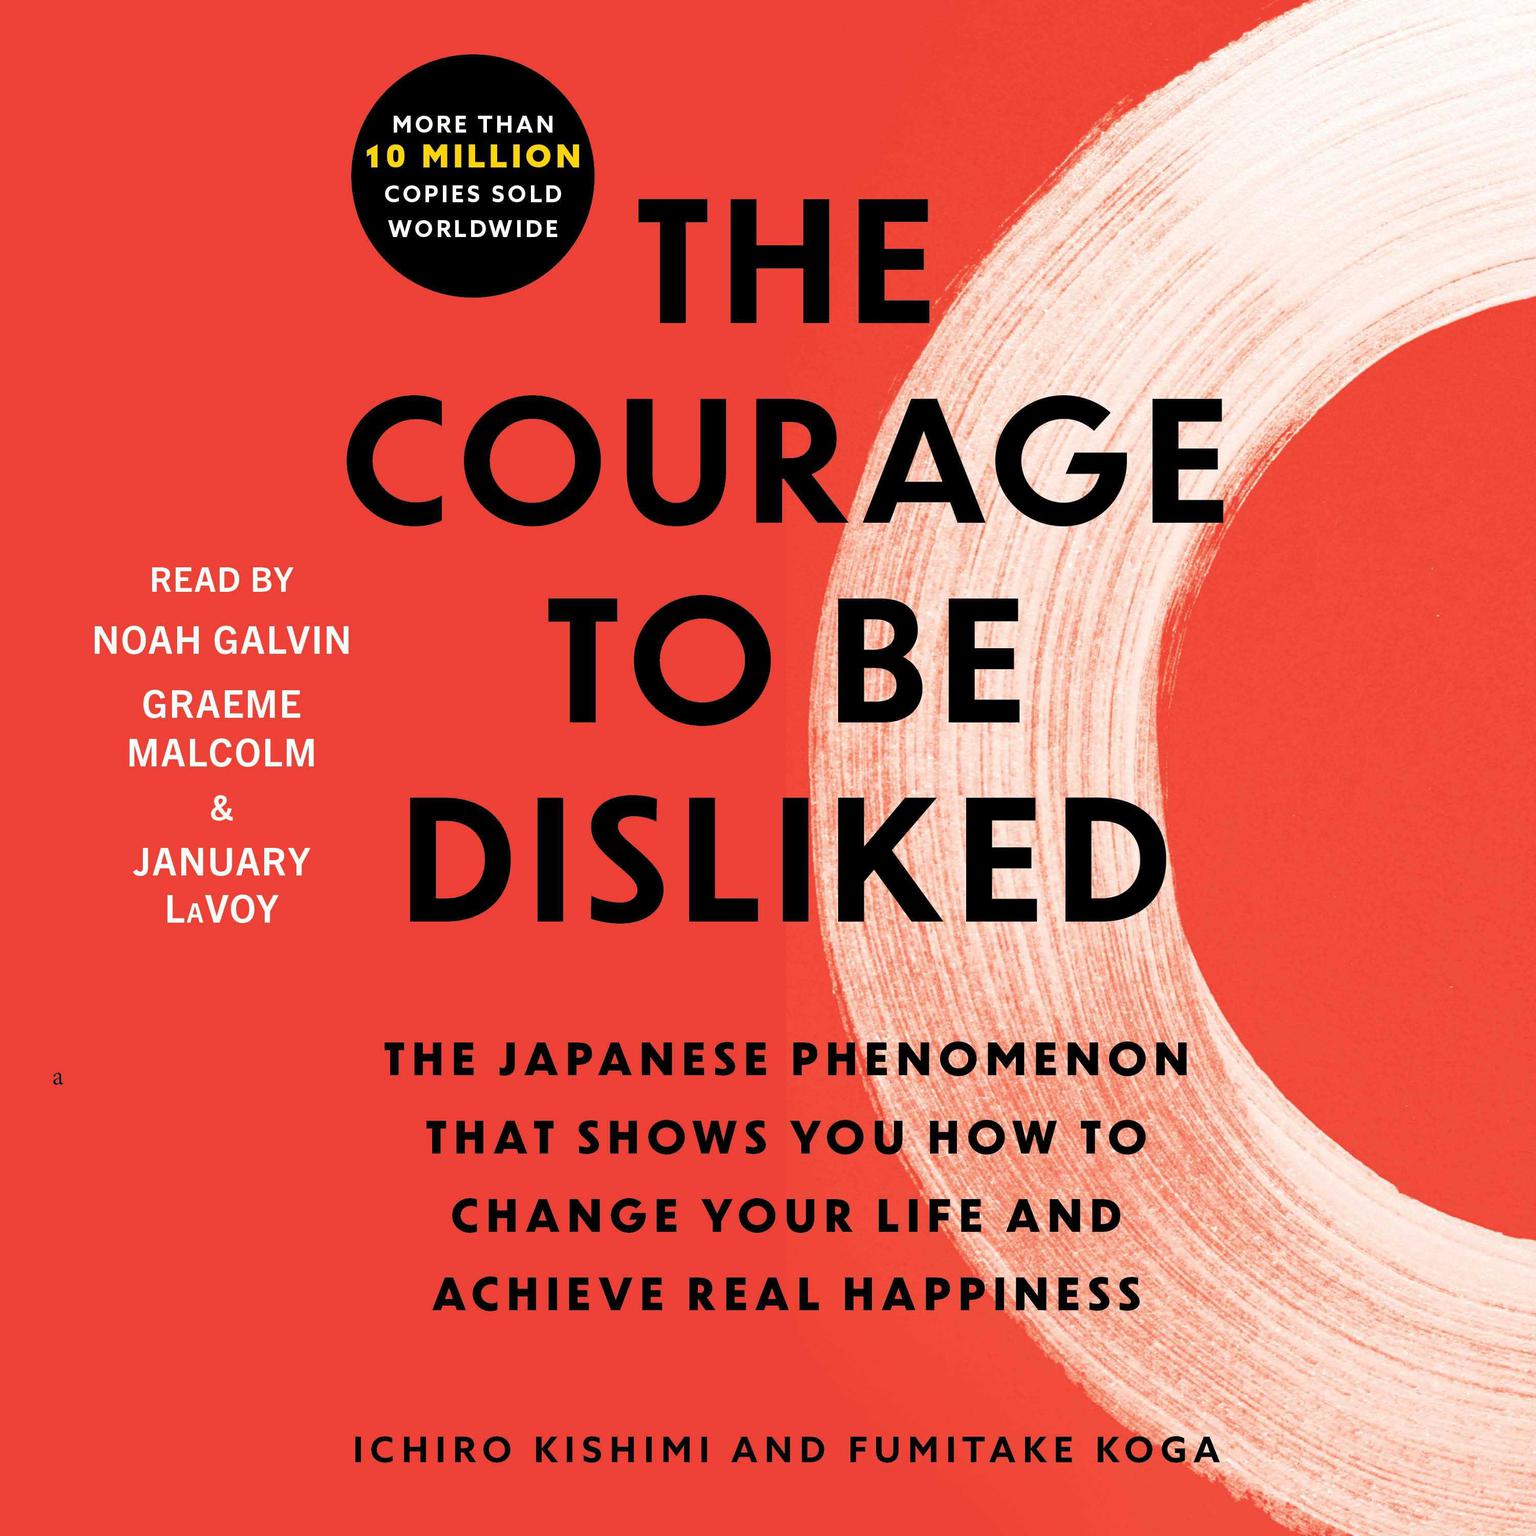 The Courage to Be Disliked: How to Free Yourself, Change Your Life, and Achieve Real Happiness Audiobook, by Ichiro Kishimi